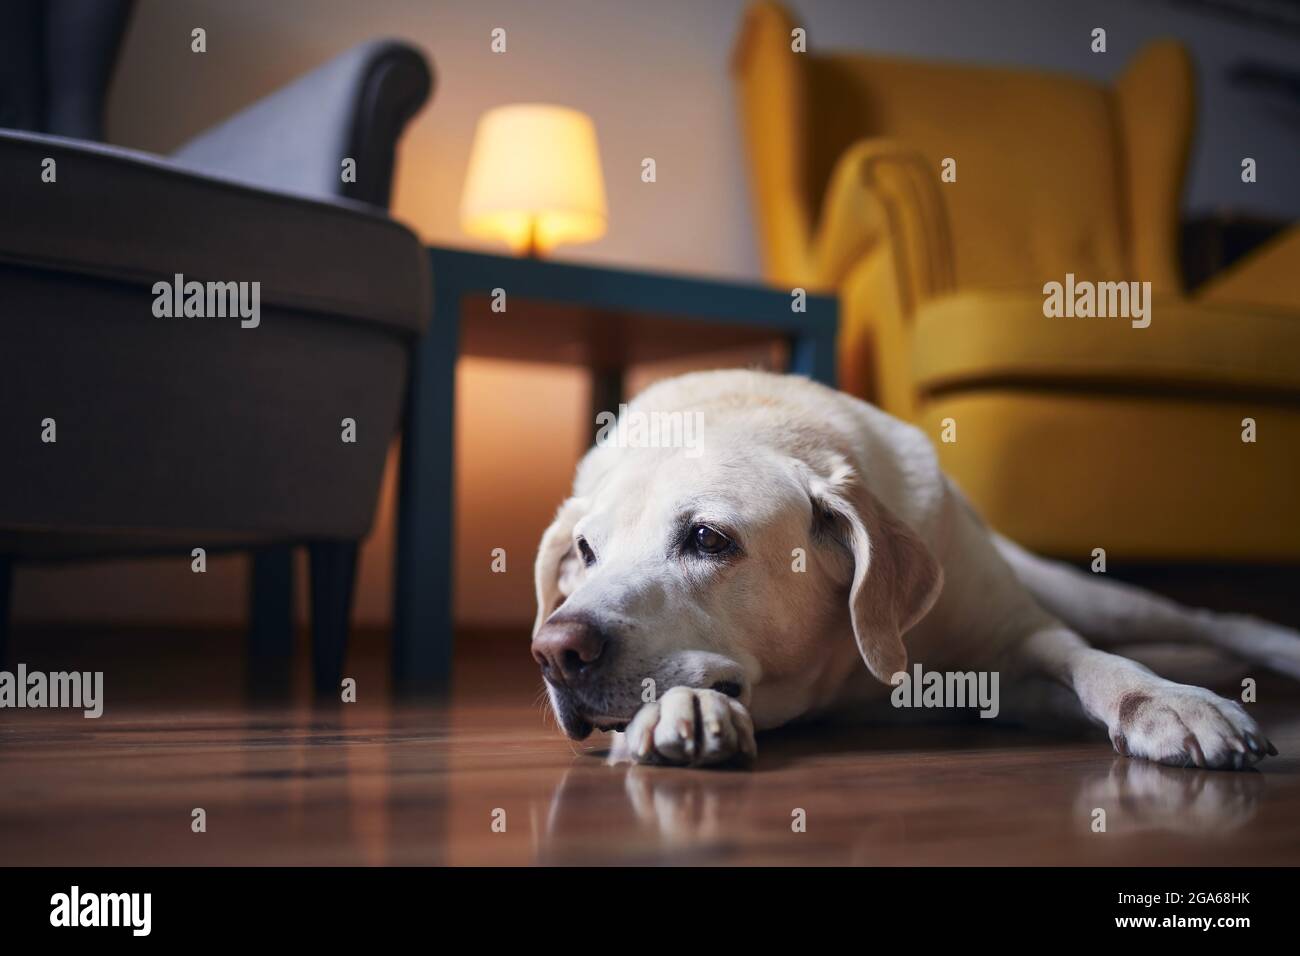 Tired dog waiting at home. Senior labrador lying down against chairs in living room. Stock Photo